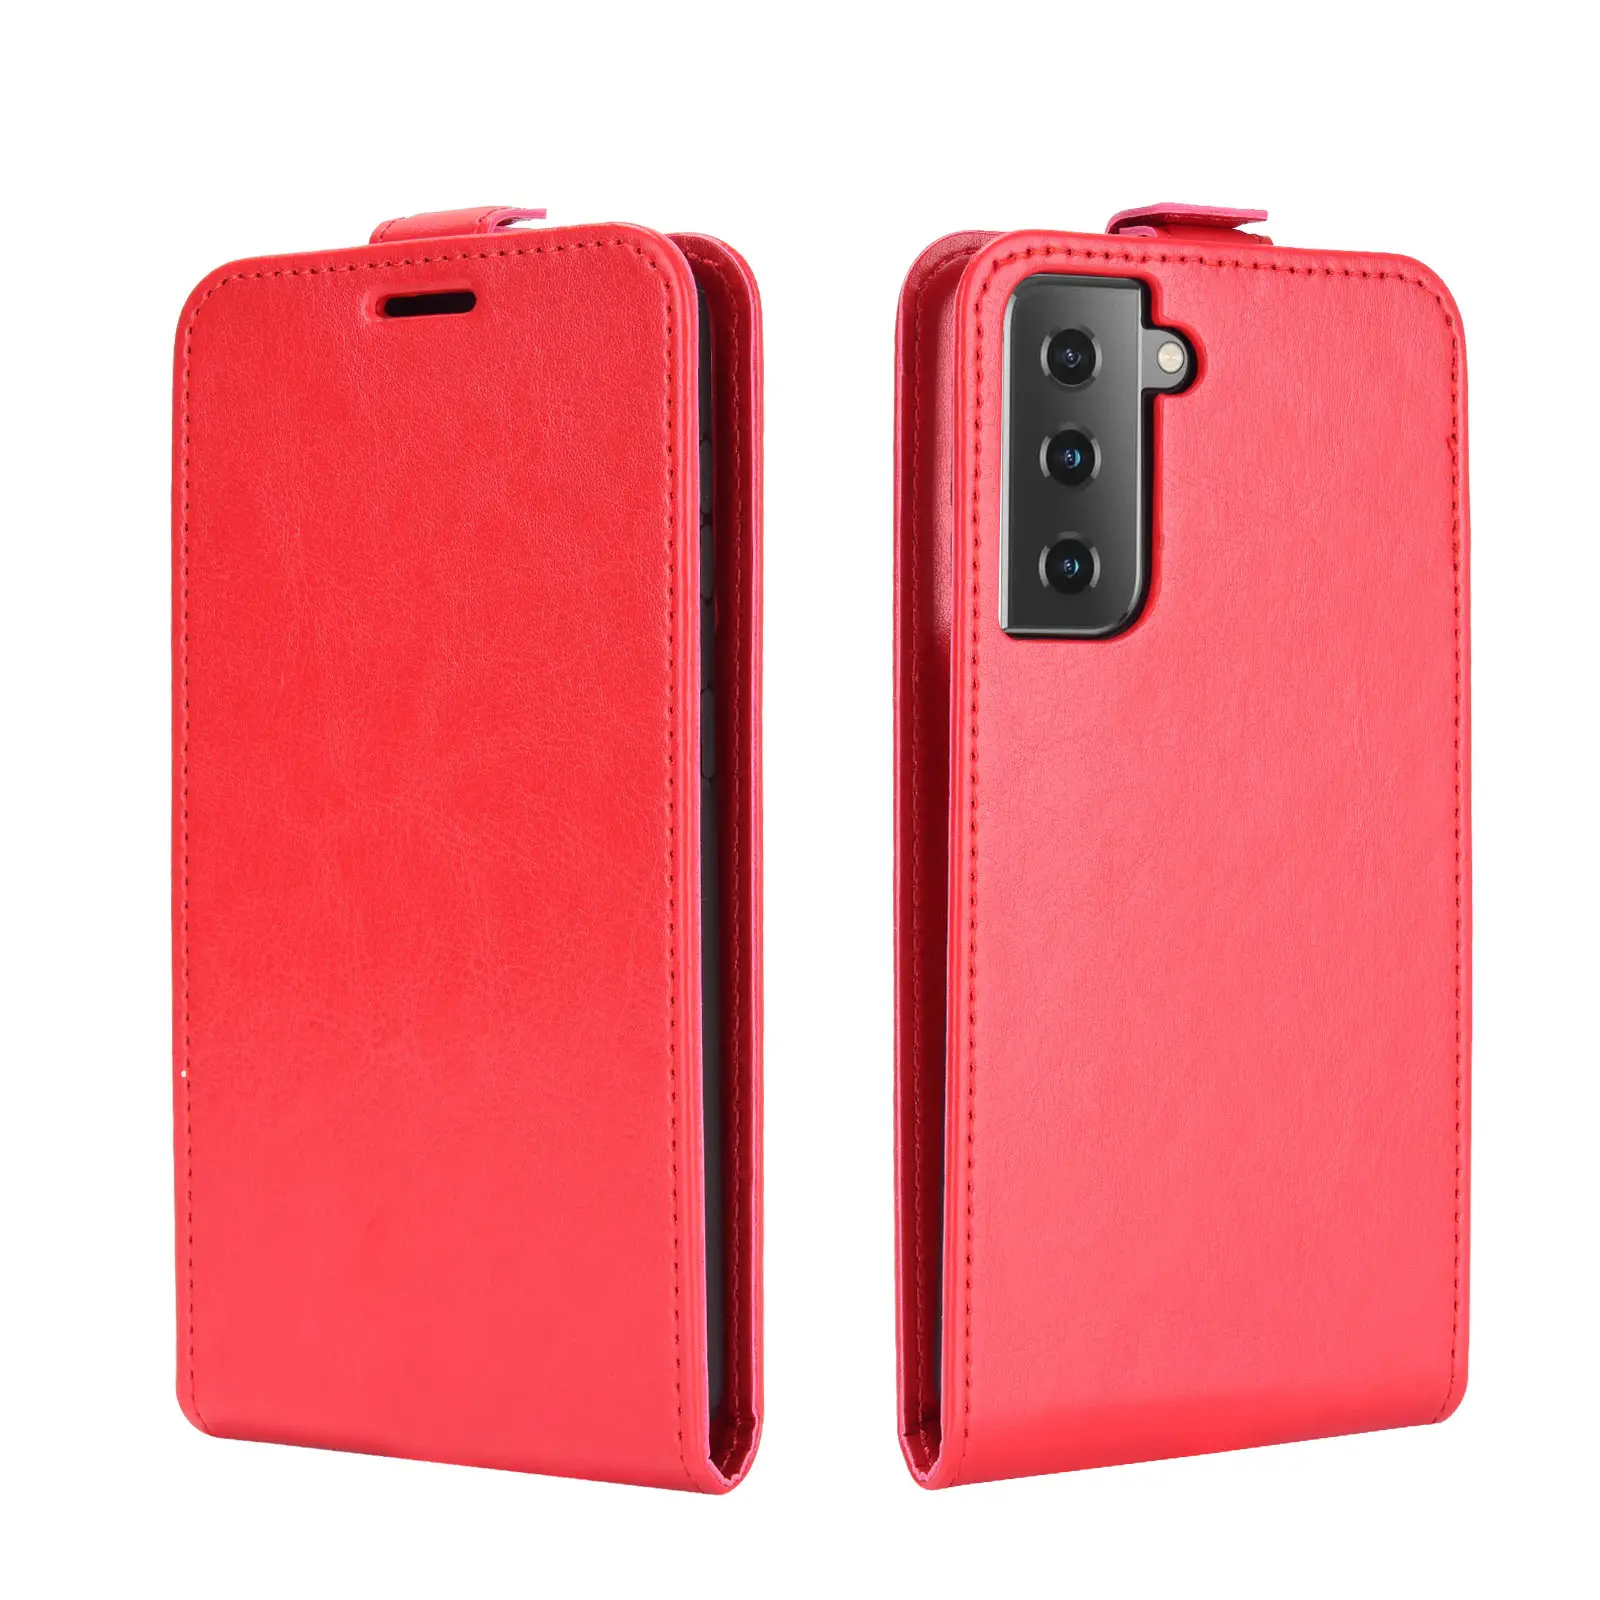 Flip Case For Galaxy S8 S9 Plus S10E S20 FE S21 S21U S4 S5 S6 S7 Edge Leather Holder Card Slots Wallet Bag Cover